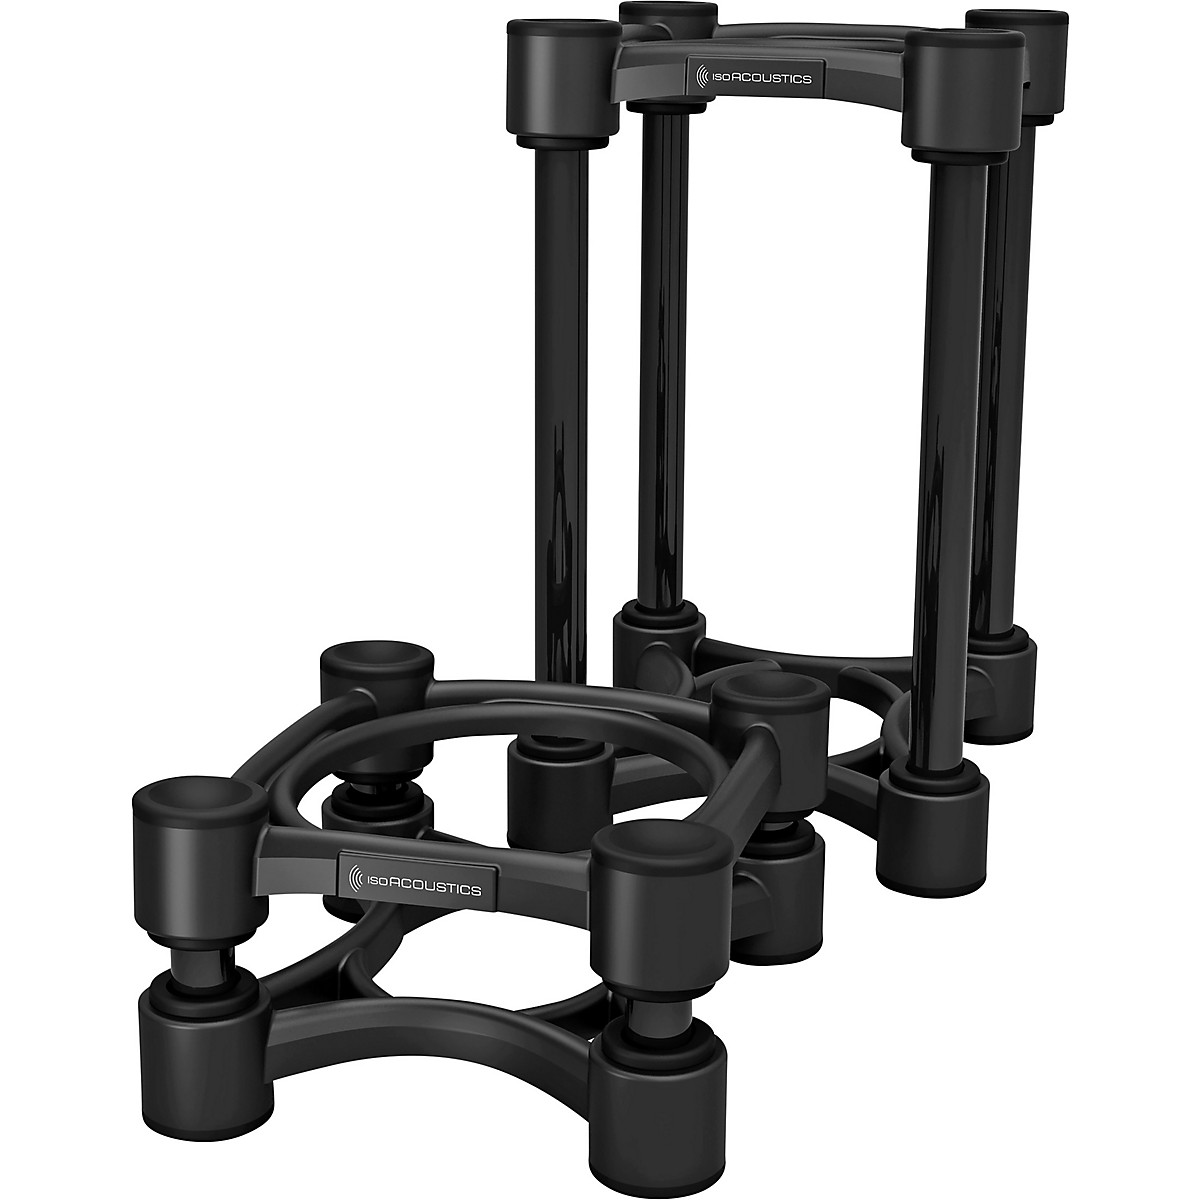 guitar center monitor stands